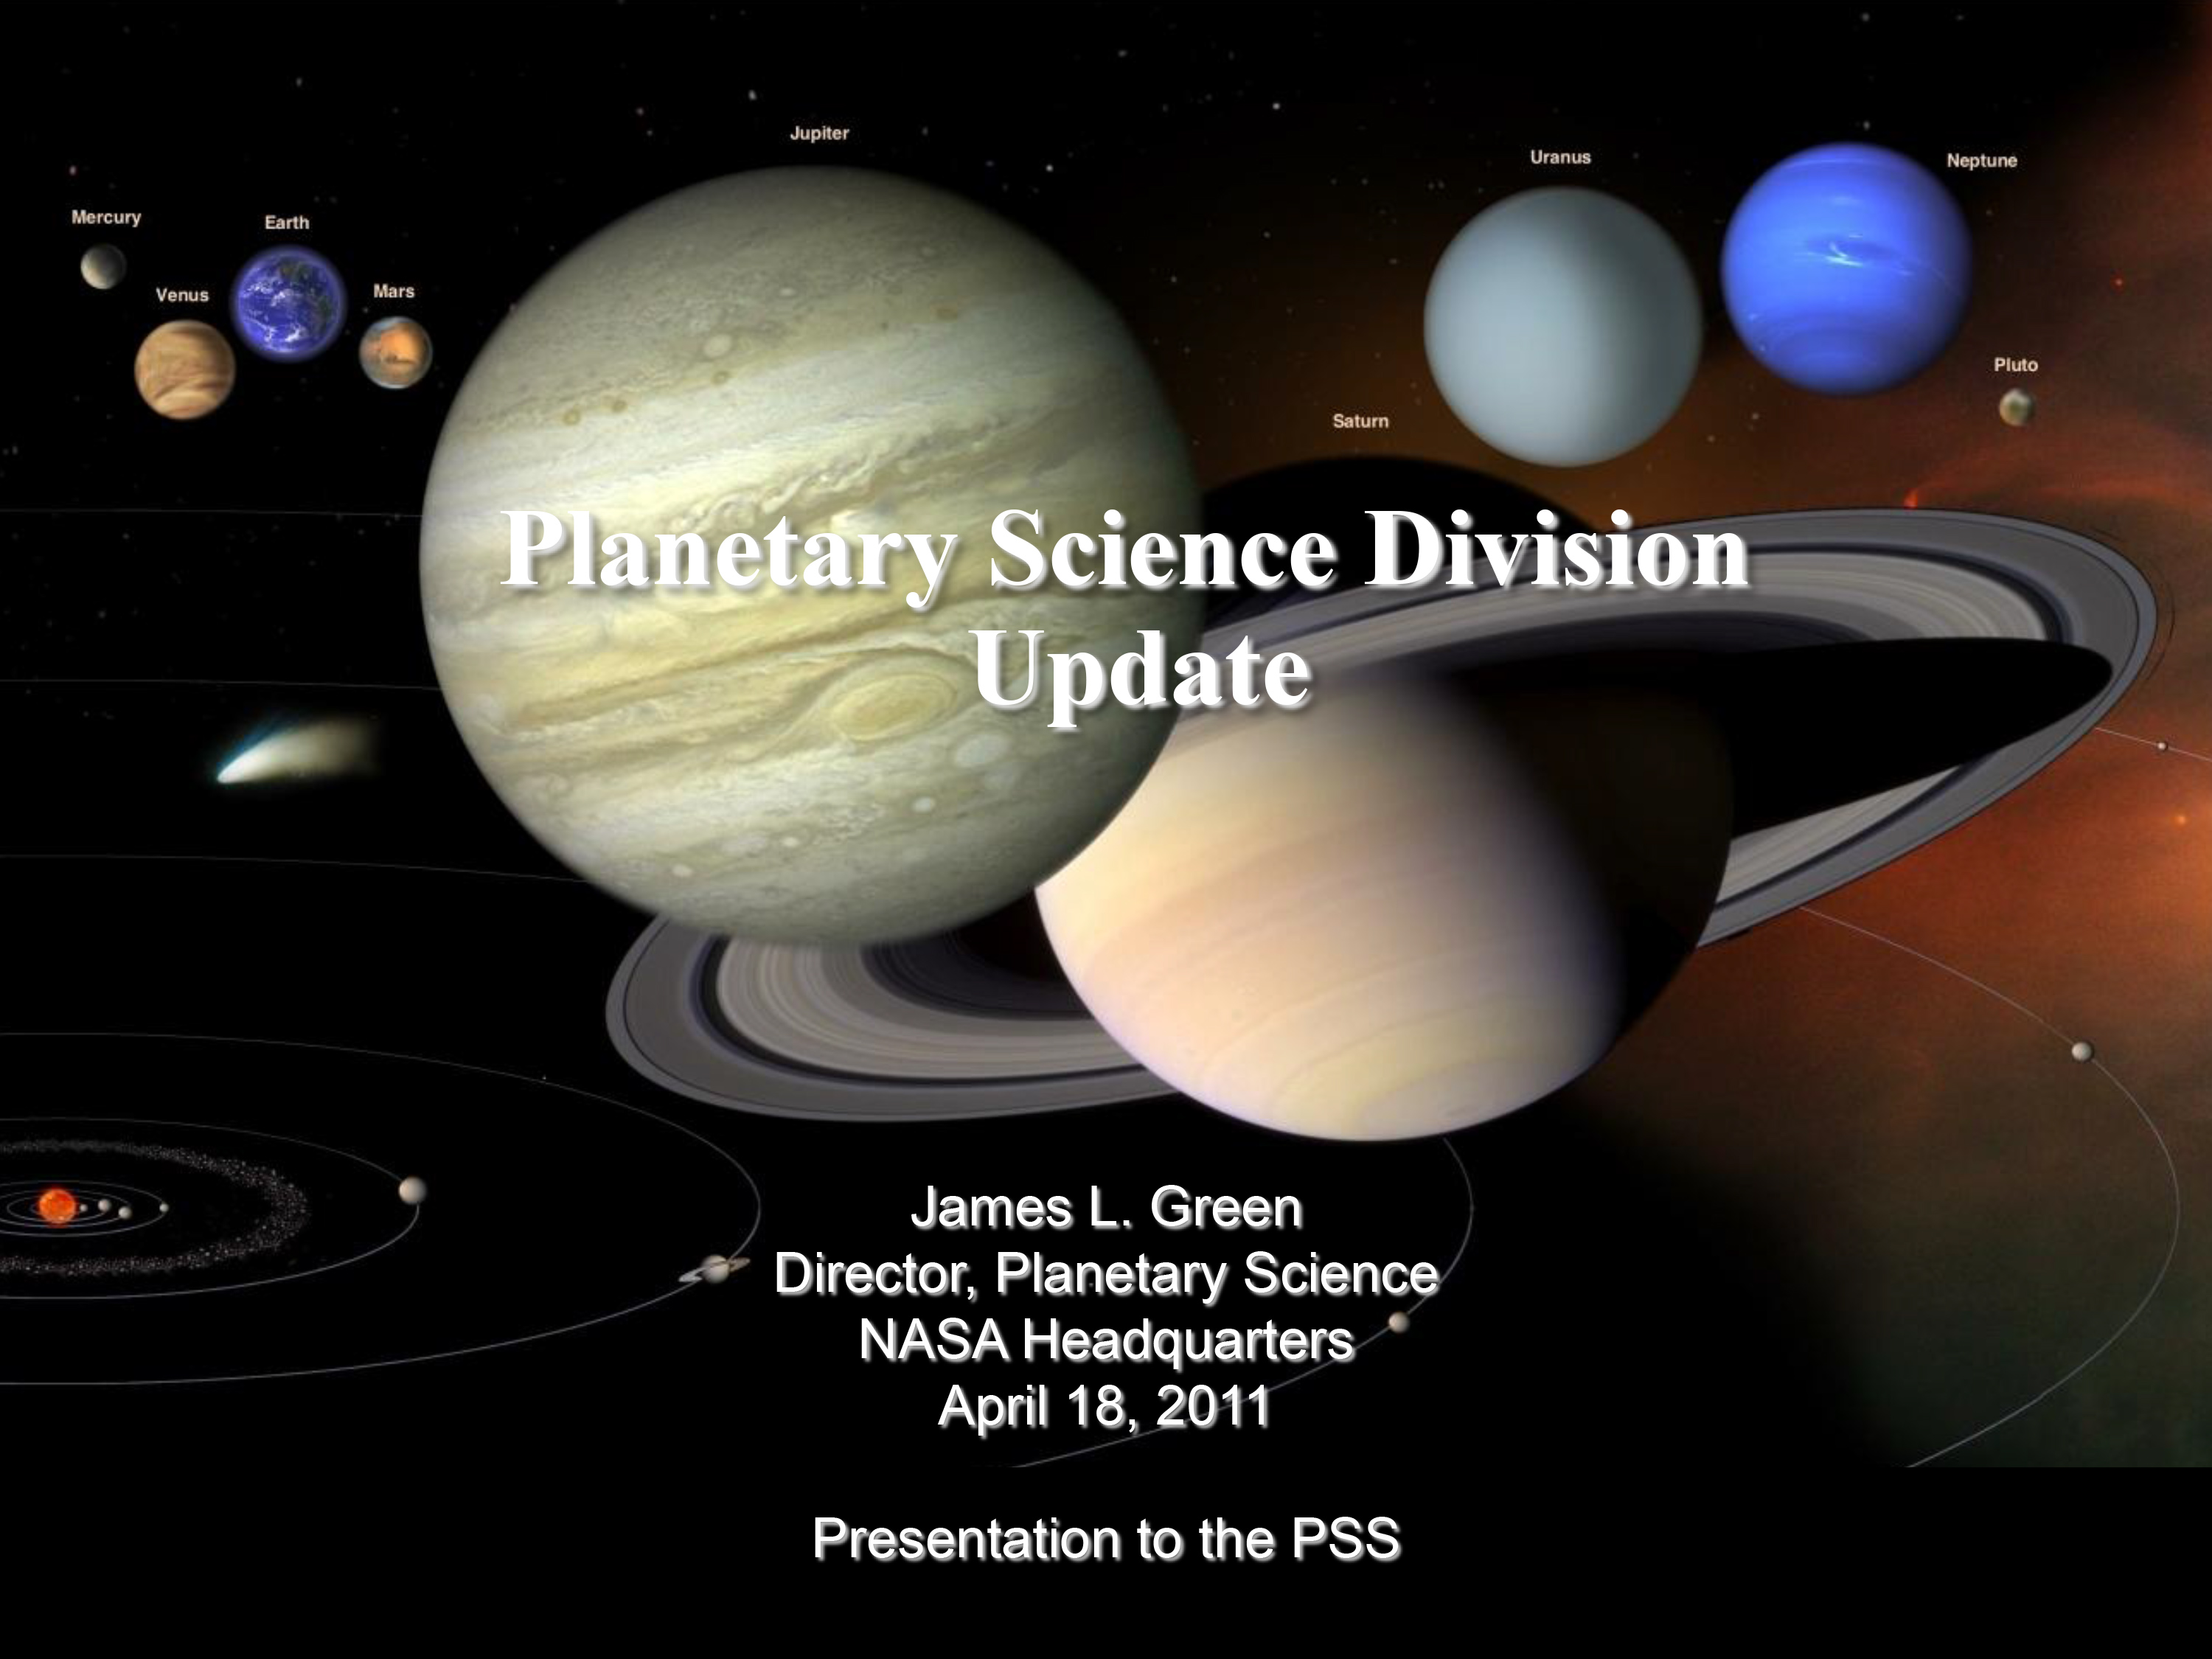 Planetary Science Division Update by Planetary Science Division Director Dr. Jim Green to PSS. 